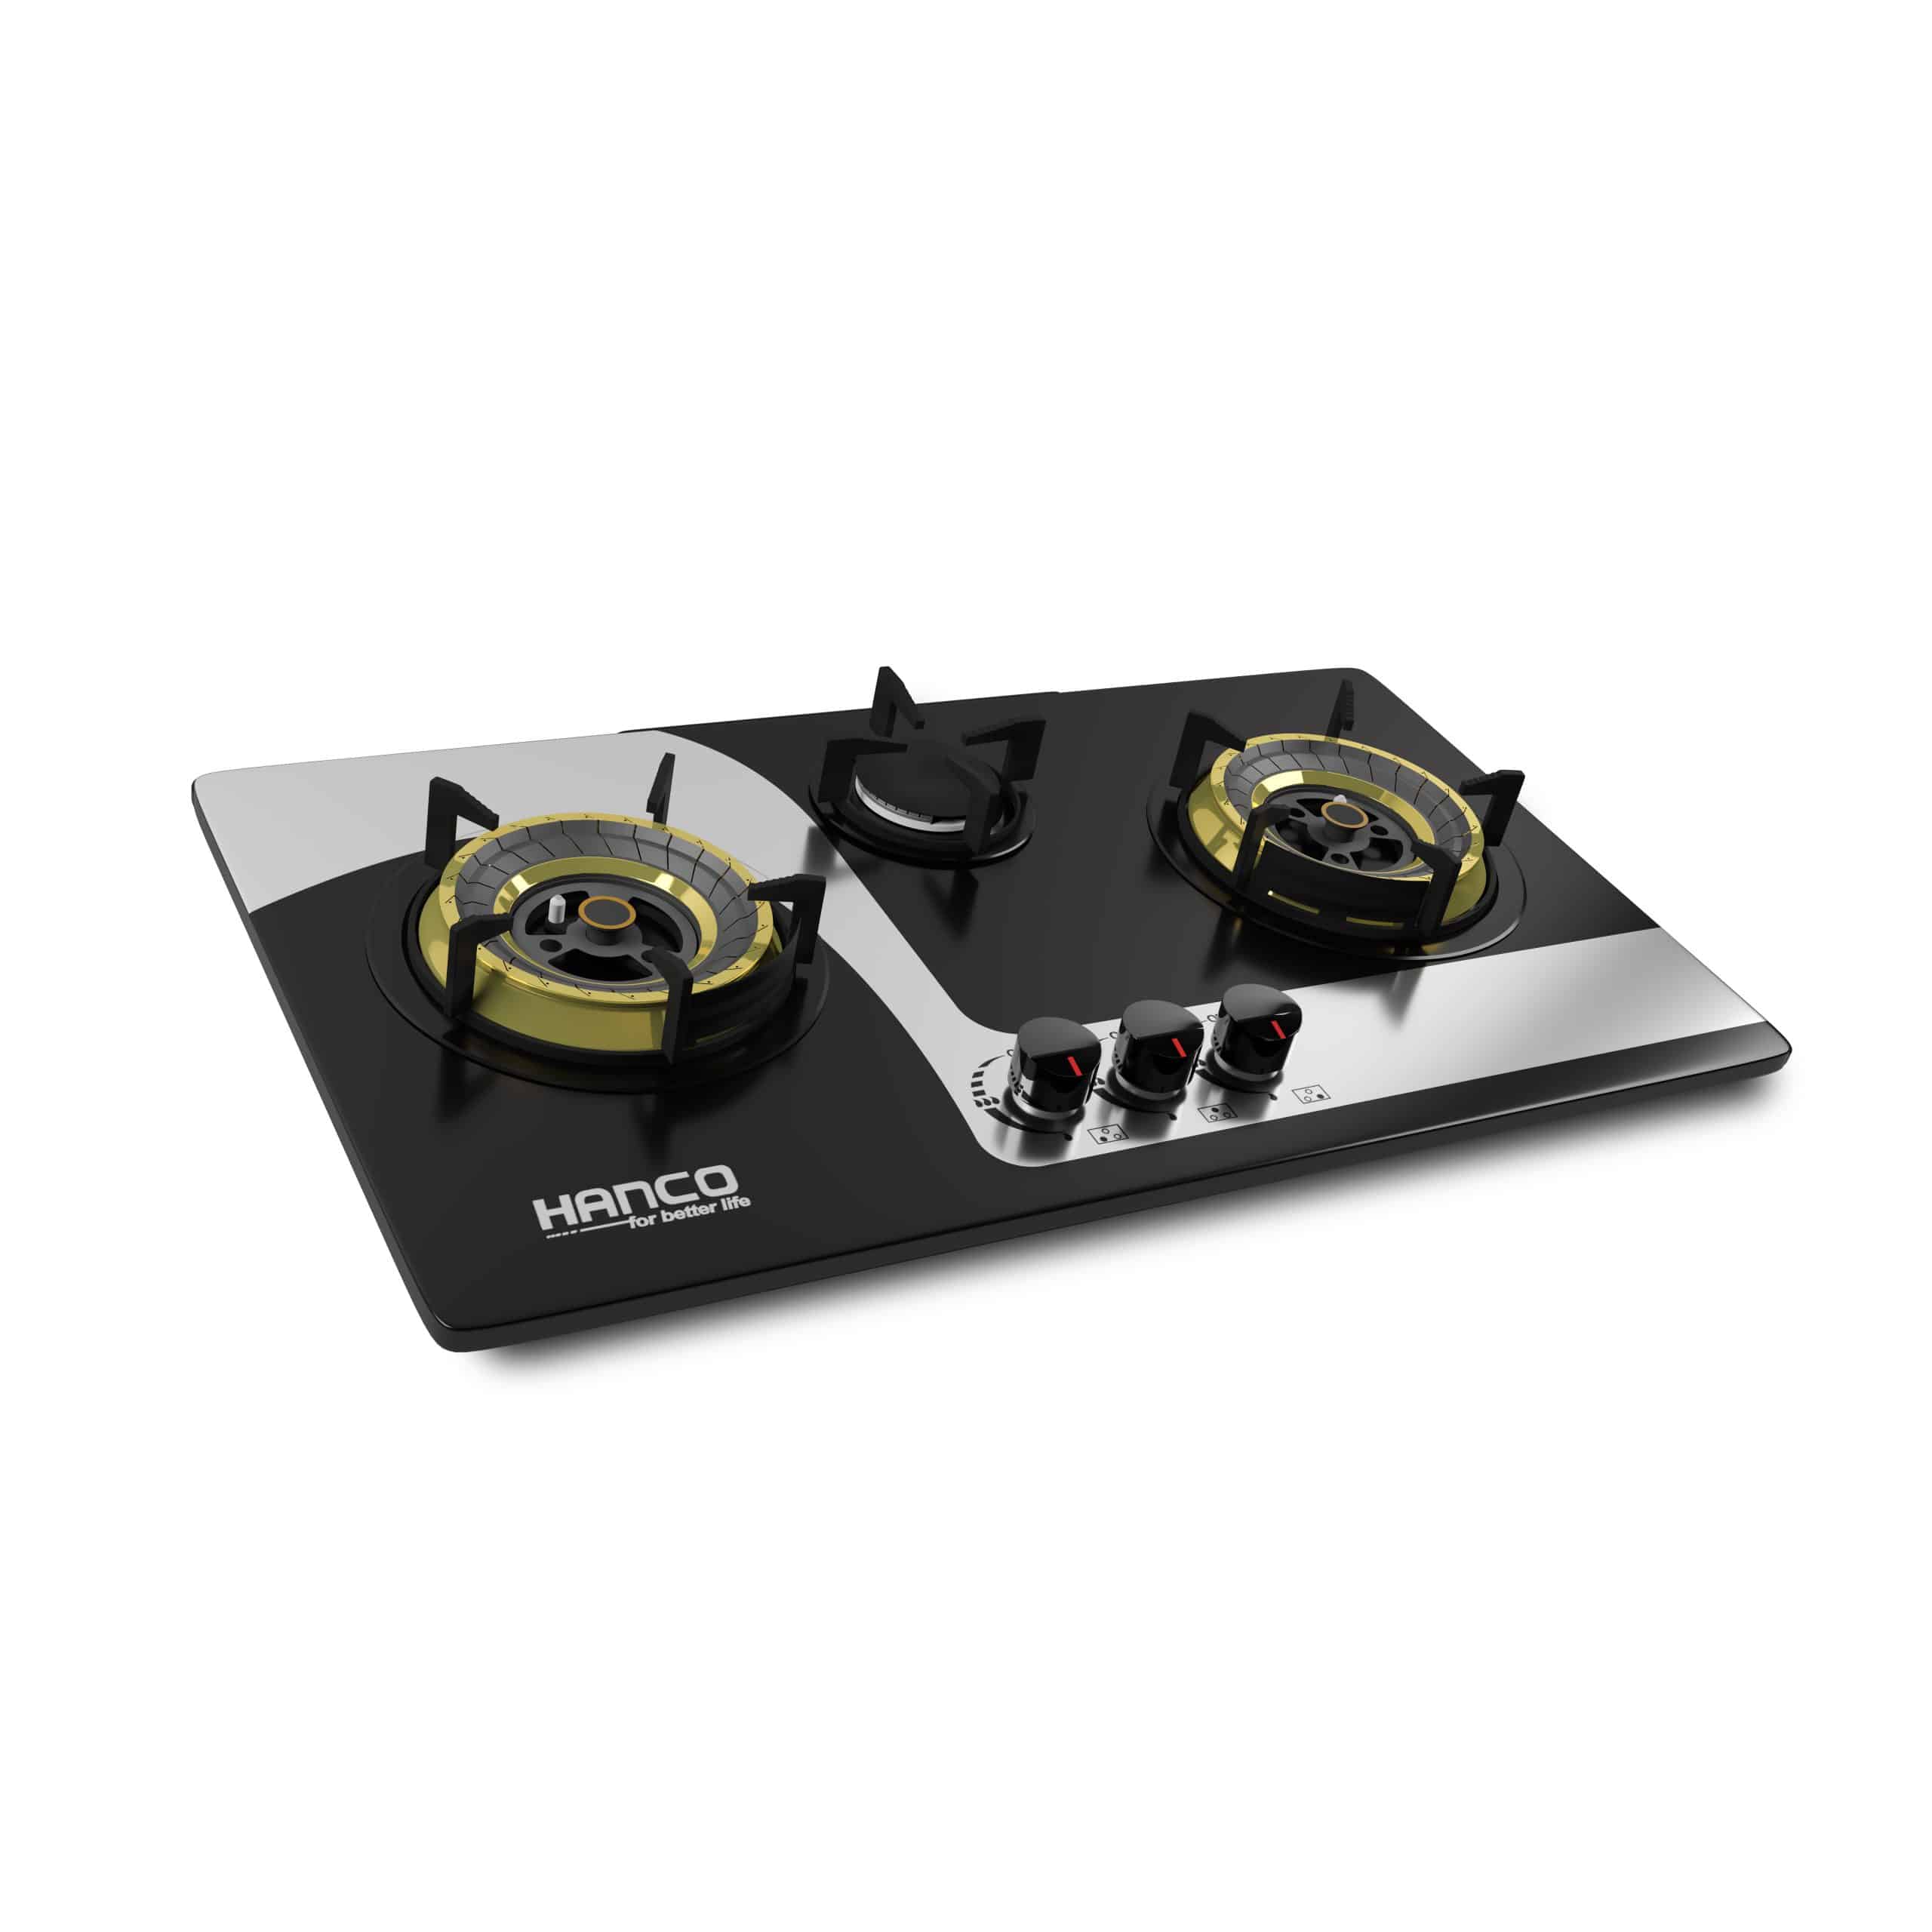 Hanco Built in Hob Stainless Steel Hob with Brass Burners (Model 213) - Auto Ignition Stove 1 Year Brand Warranty